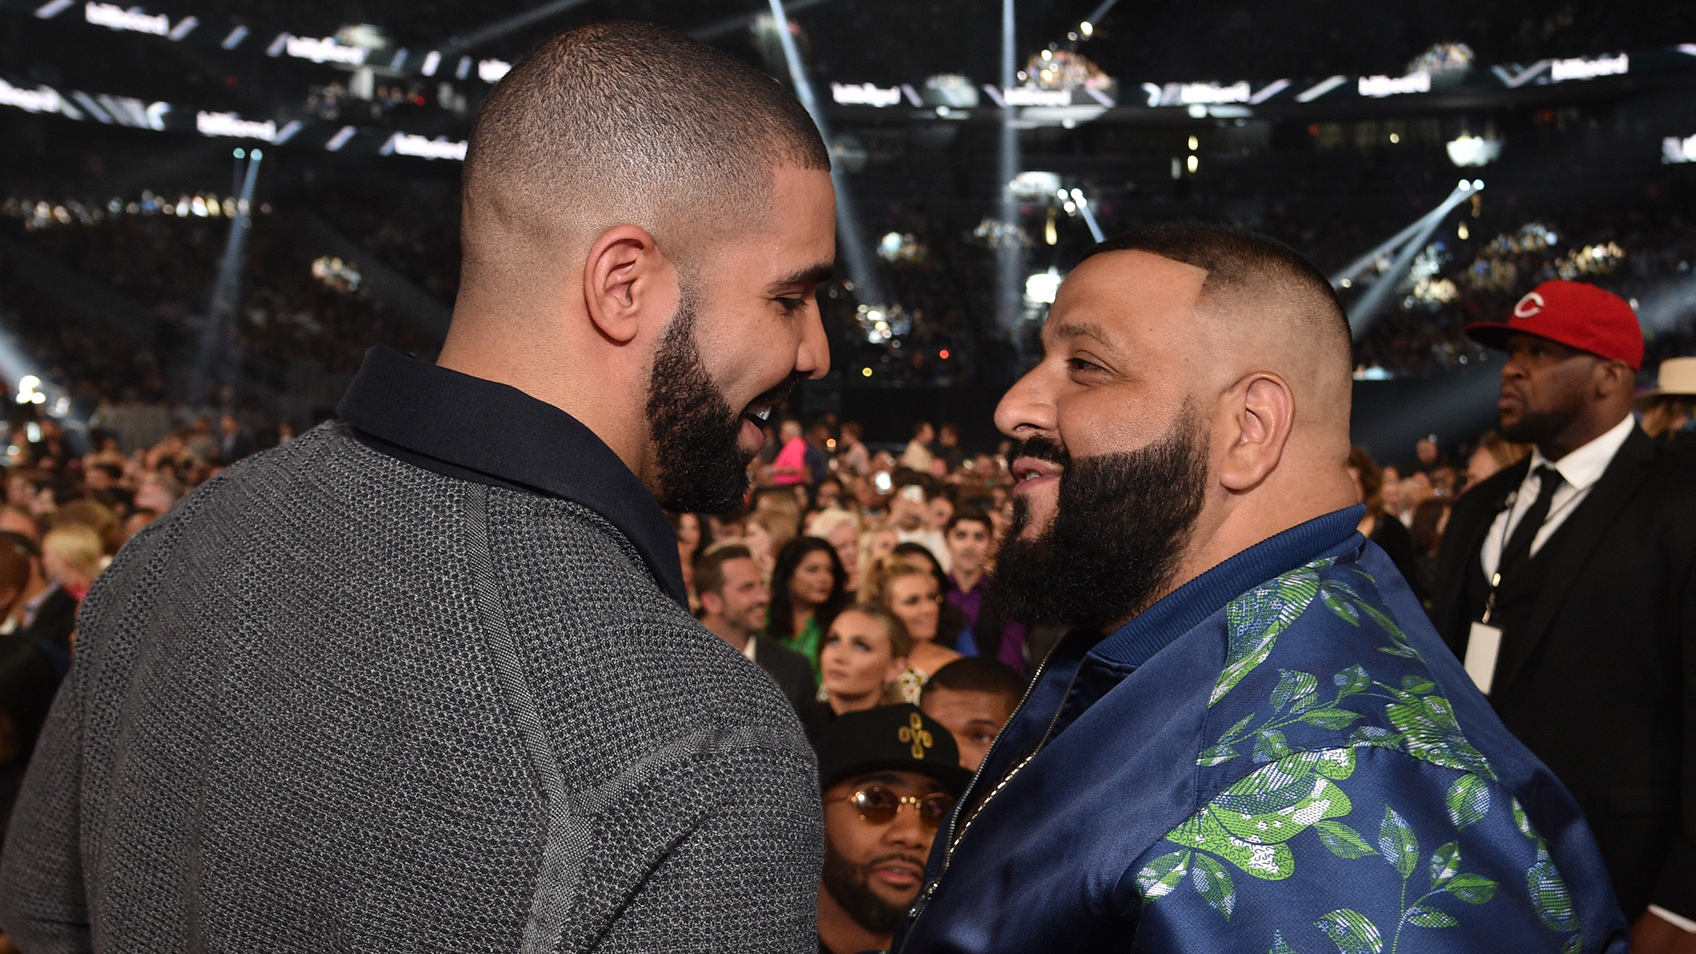 Listen to Drake and DJ Khaled's New Songs “POPSTAR” and “GREECE” | Pitchfork